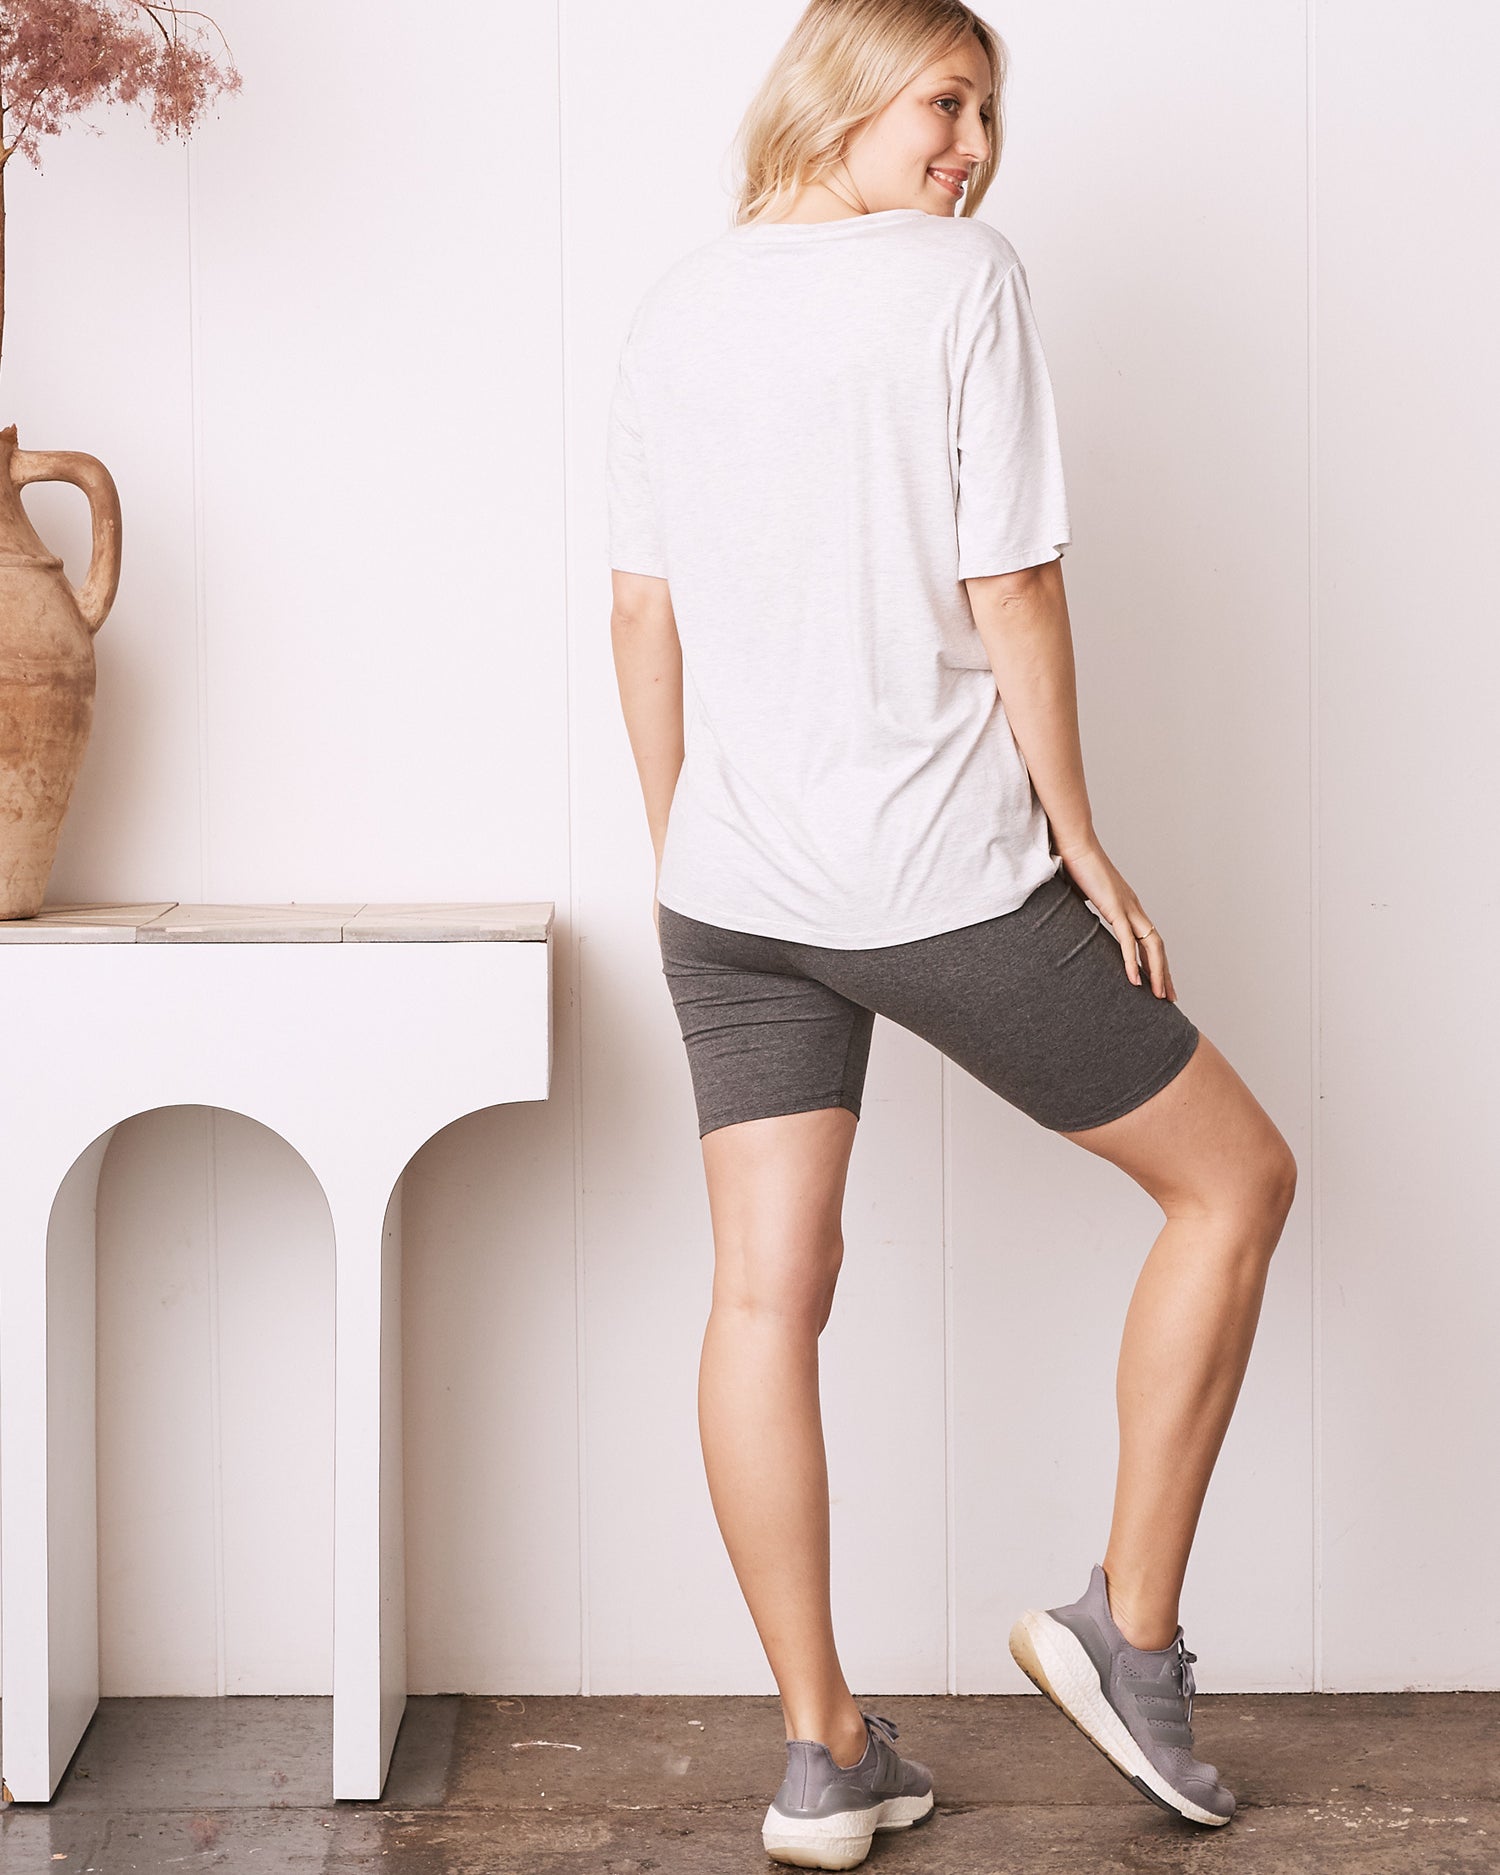 Maternity Shorts Australia: Comfort and Style for Pregnant Women – ANGEL  MATERNITY